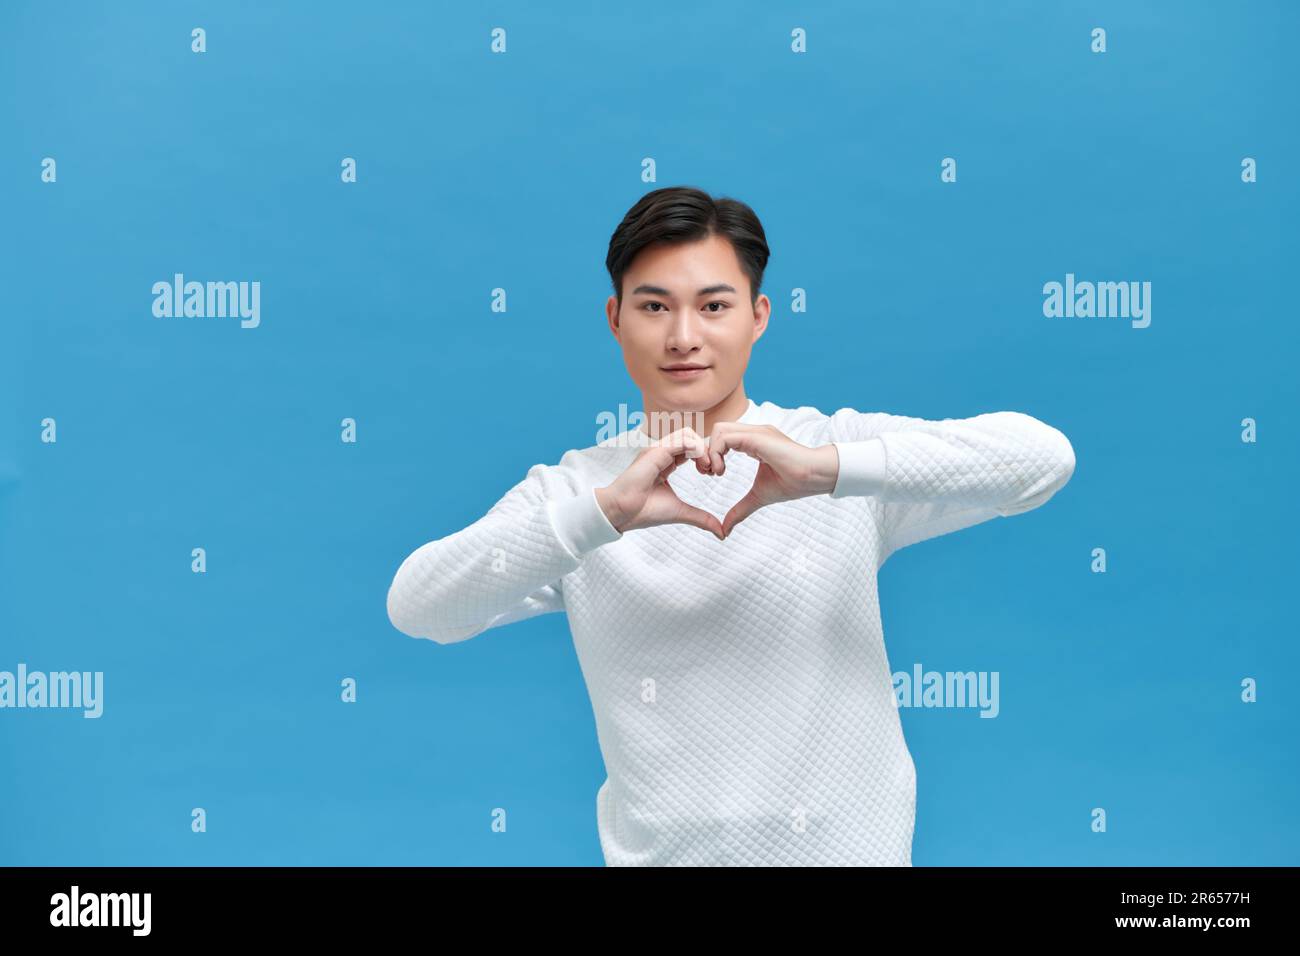 Portrait of attractive Asian man in red t-shirt speaks about own feelings, makes heart gesture over chest, Stock Photo